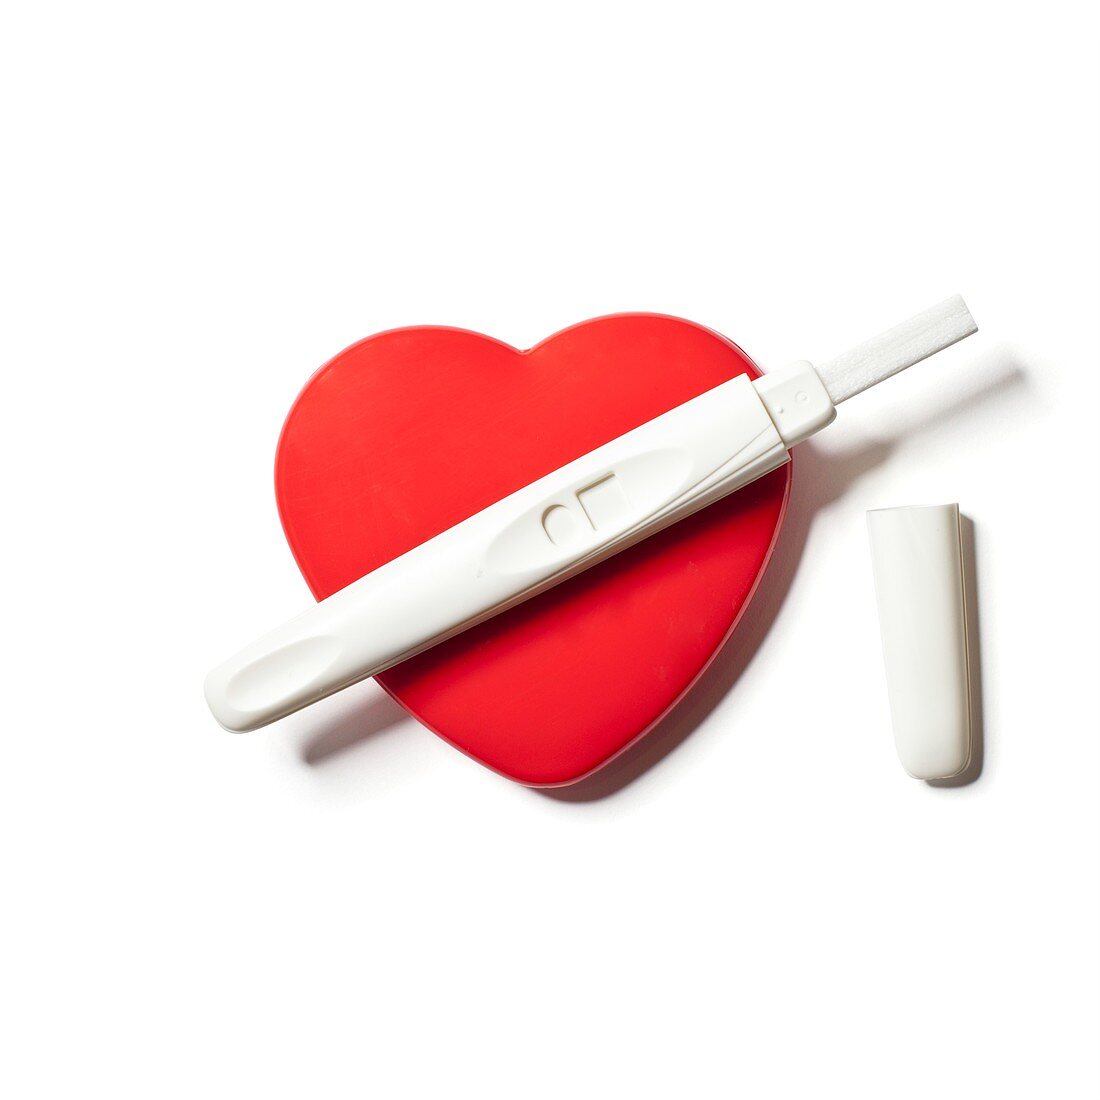 Pregnancy test on red heart